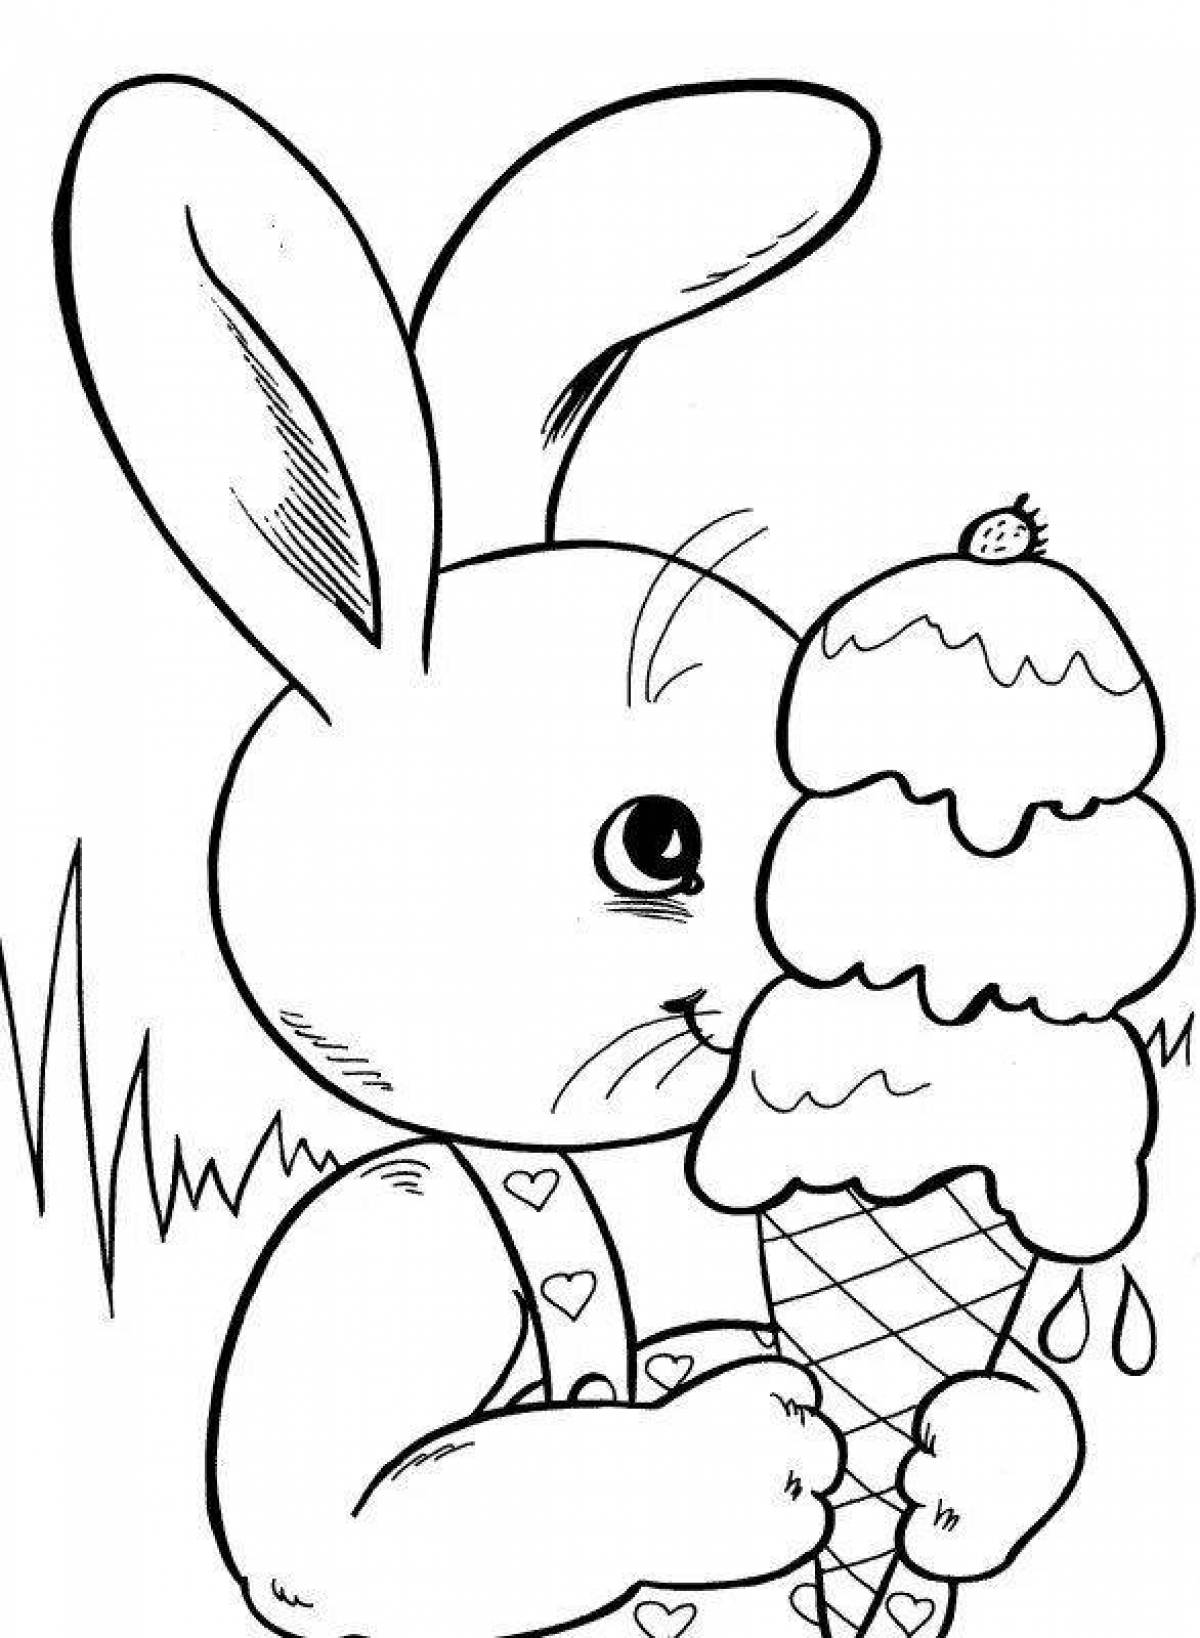 Dazzling Bunny Coloring Page for 6-7 year olds